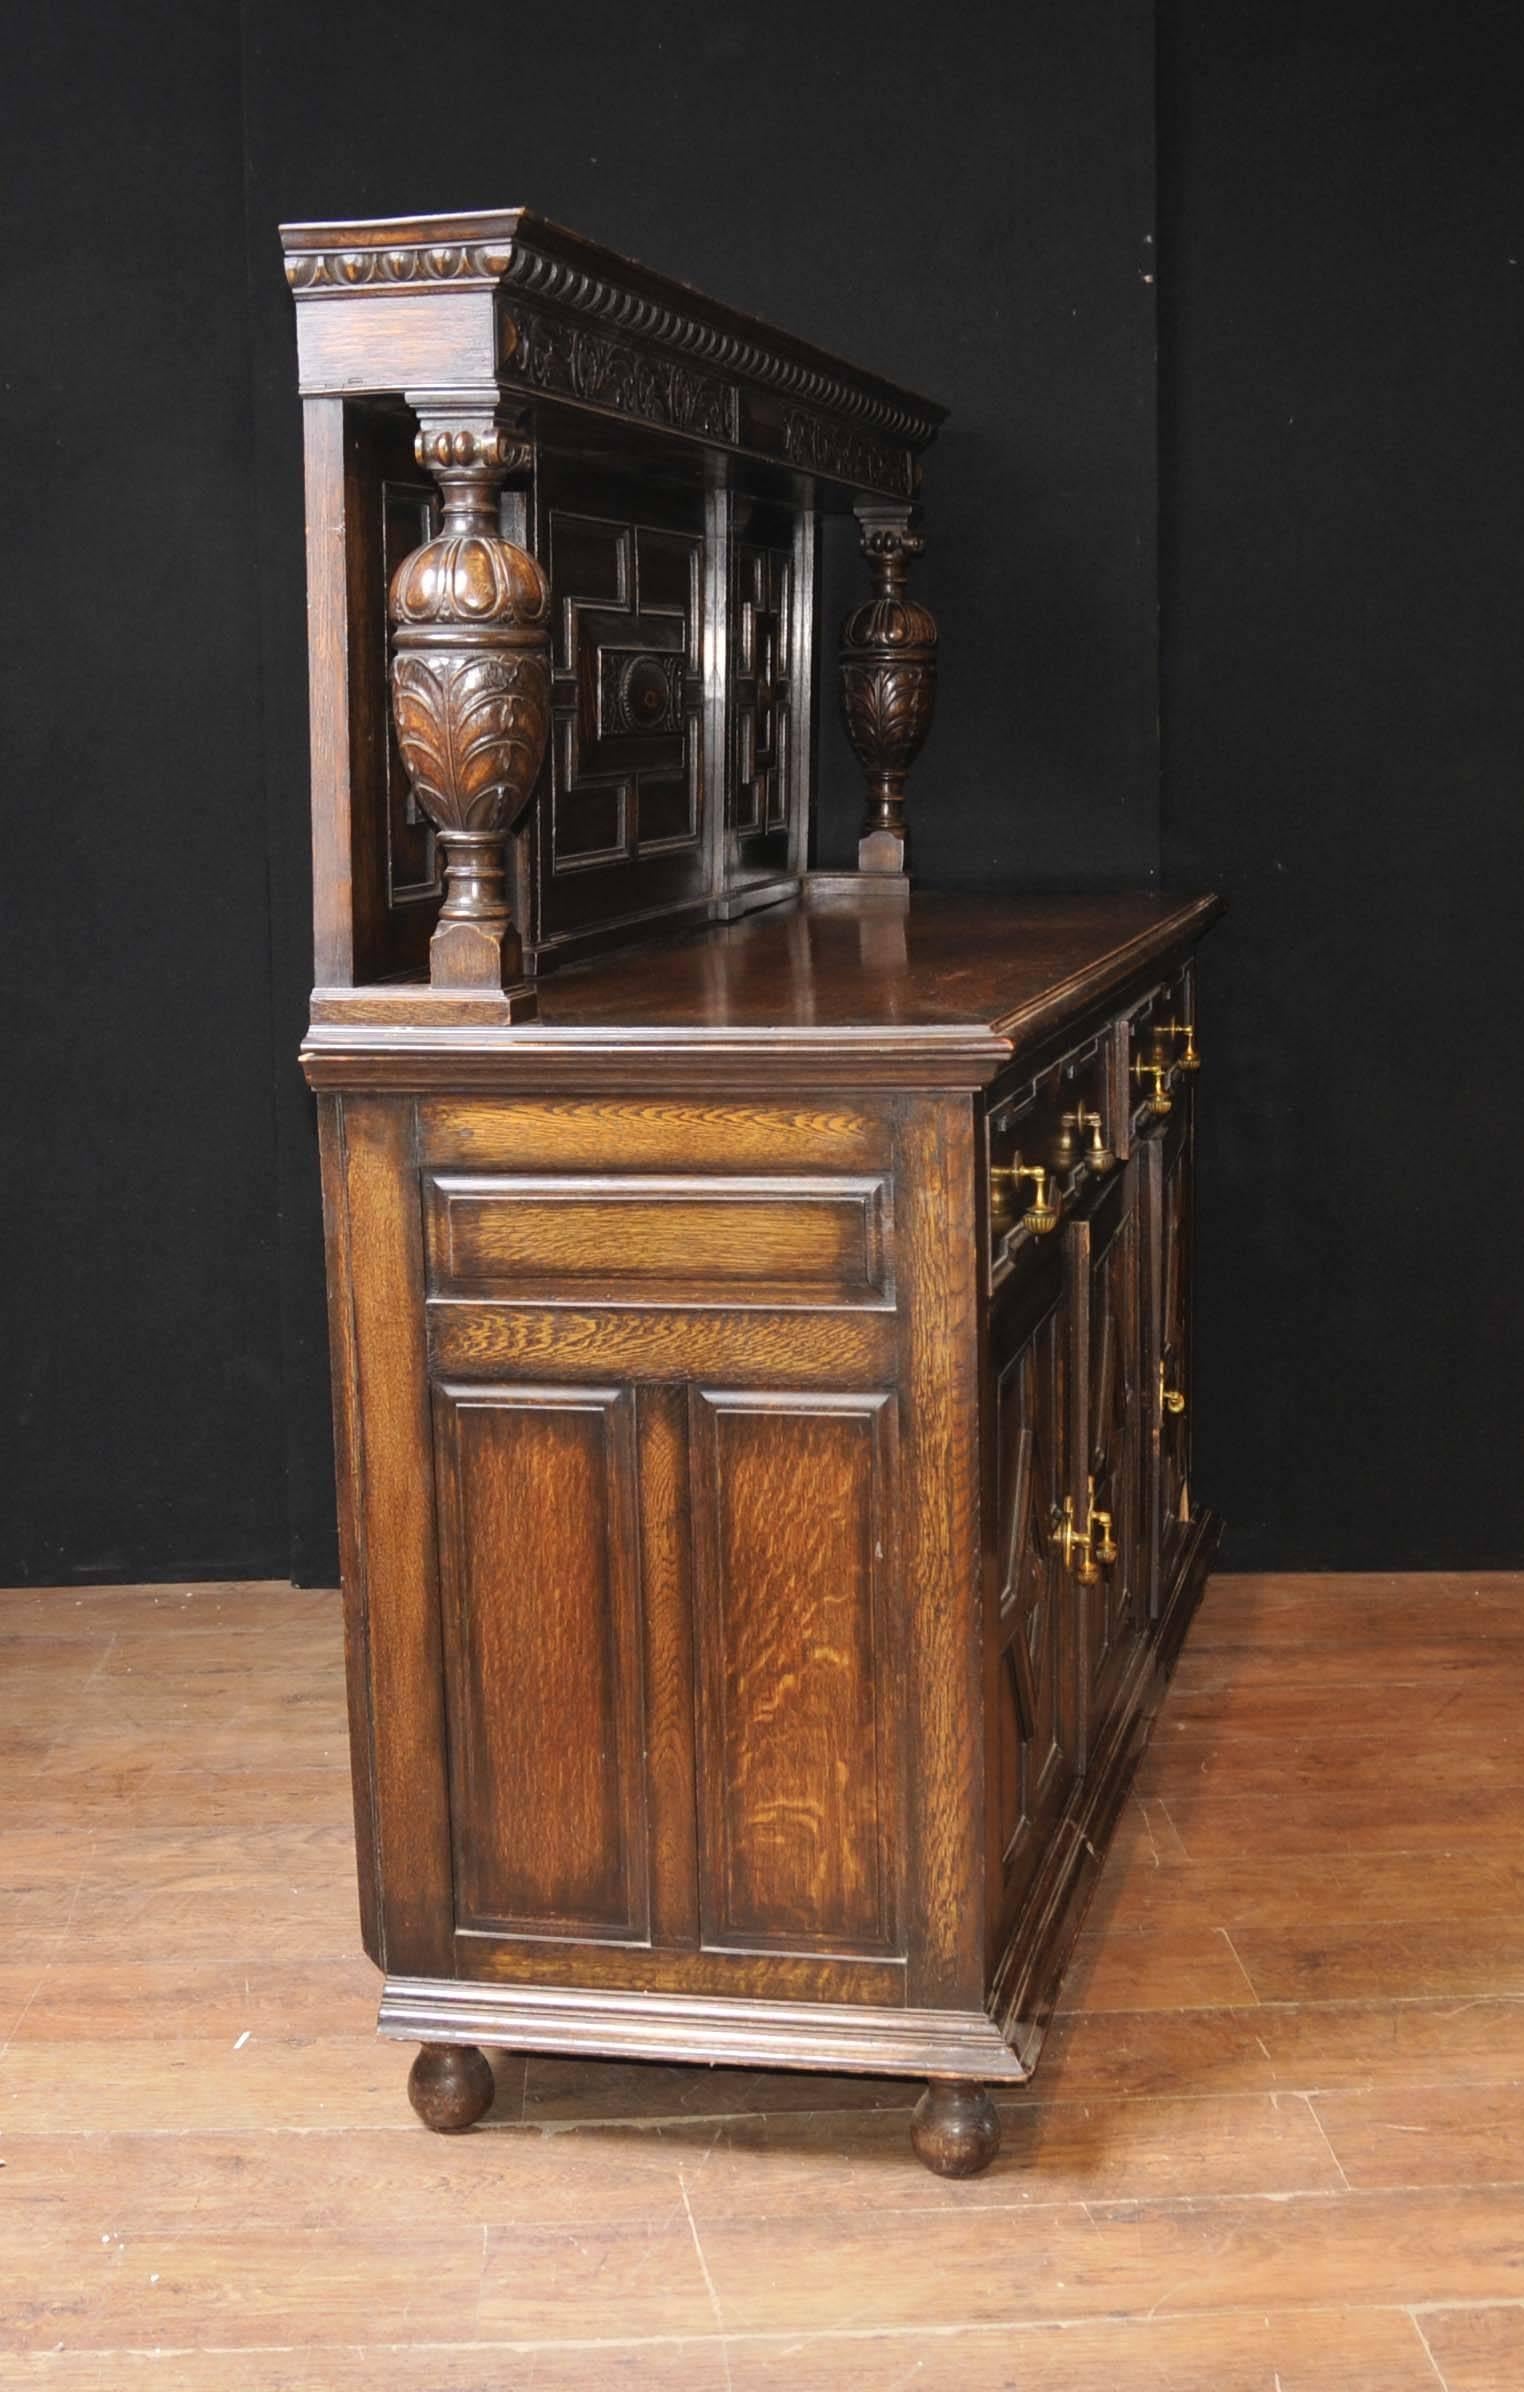 Antique oak Jacobean style sideboard or buffet server.
Hand-carved details are exquisite and this is perfect for that farmhouse look.
Love the hand-carved frieze and bulbous urn supports, really makes this stand out
We have lots of matching oak